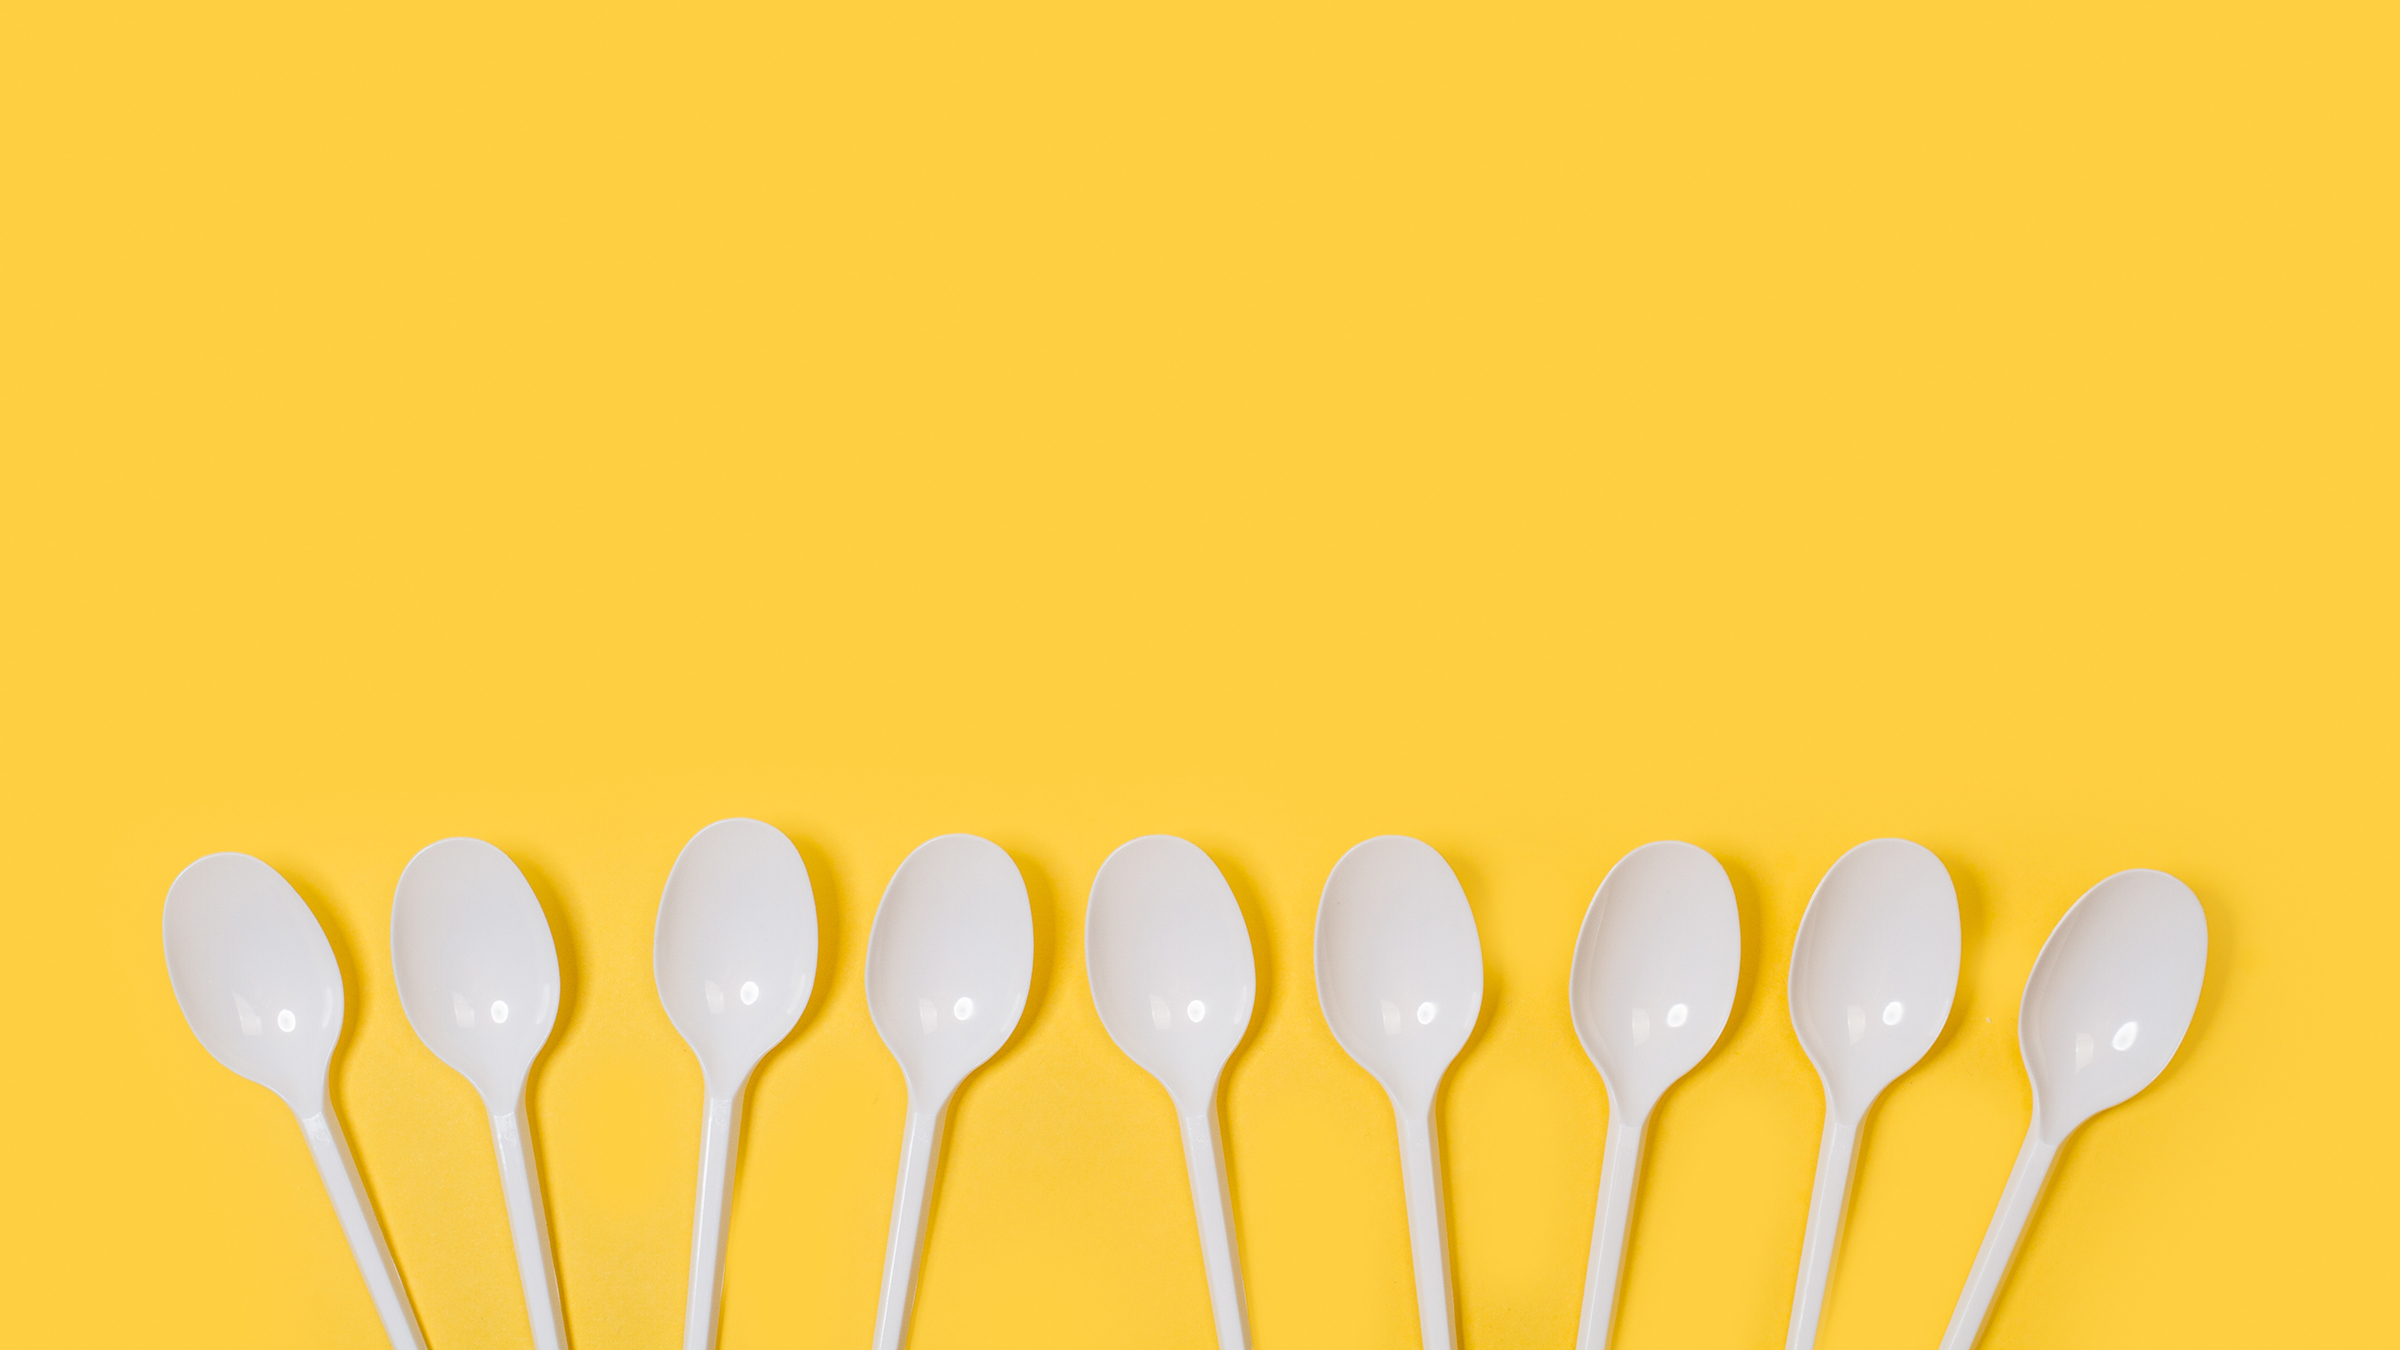 What Is Spoon Theory Used for, and What Are Its Benefits? - GoodRx